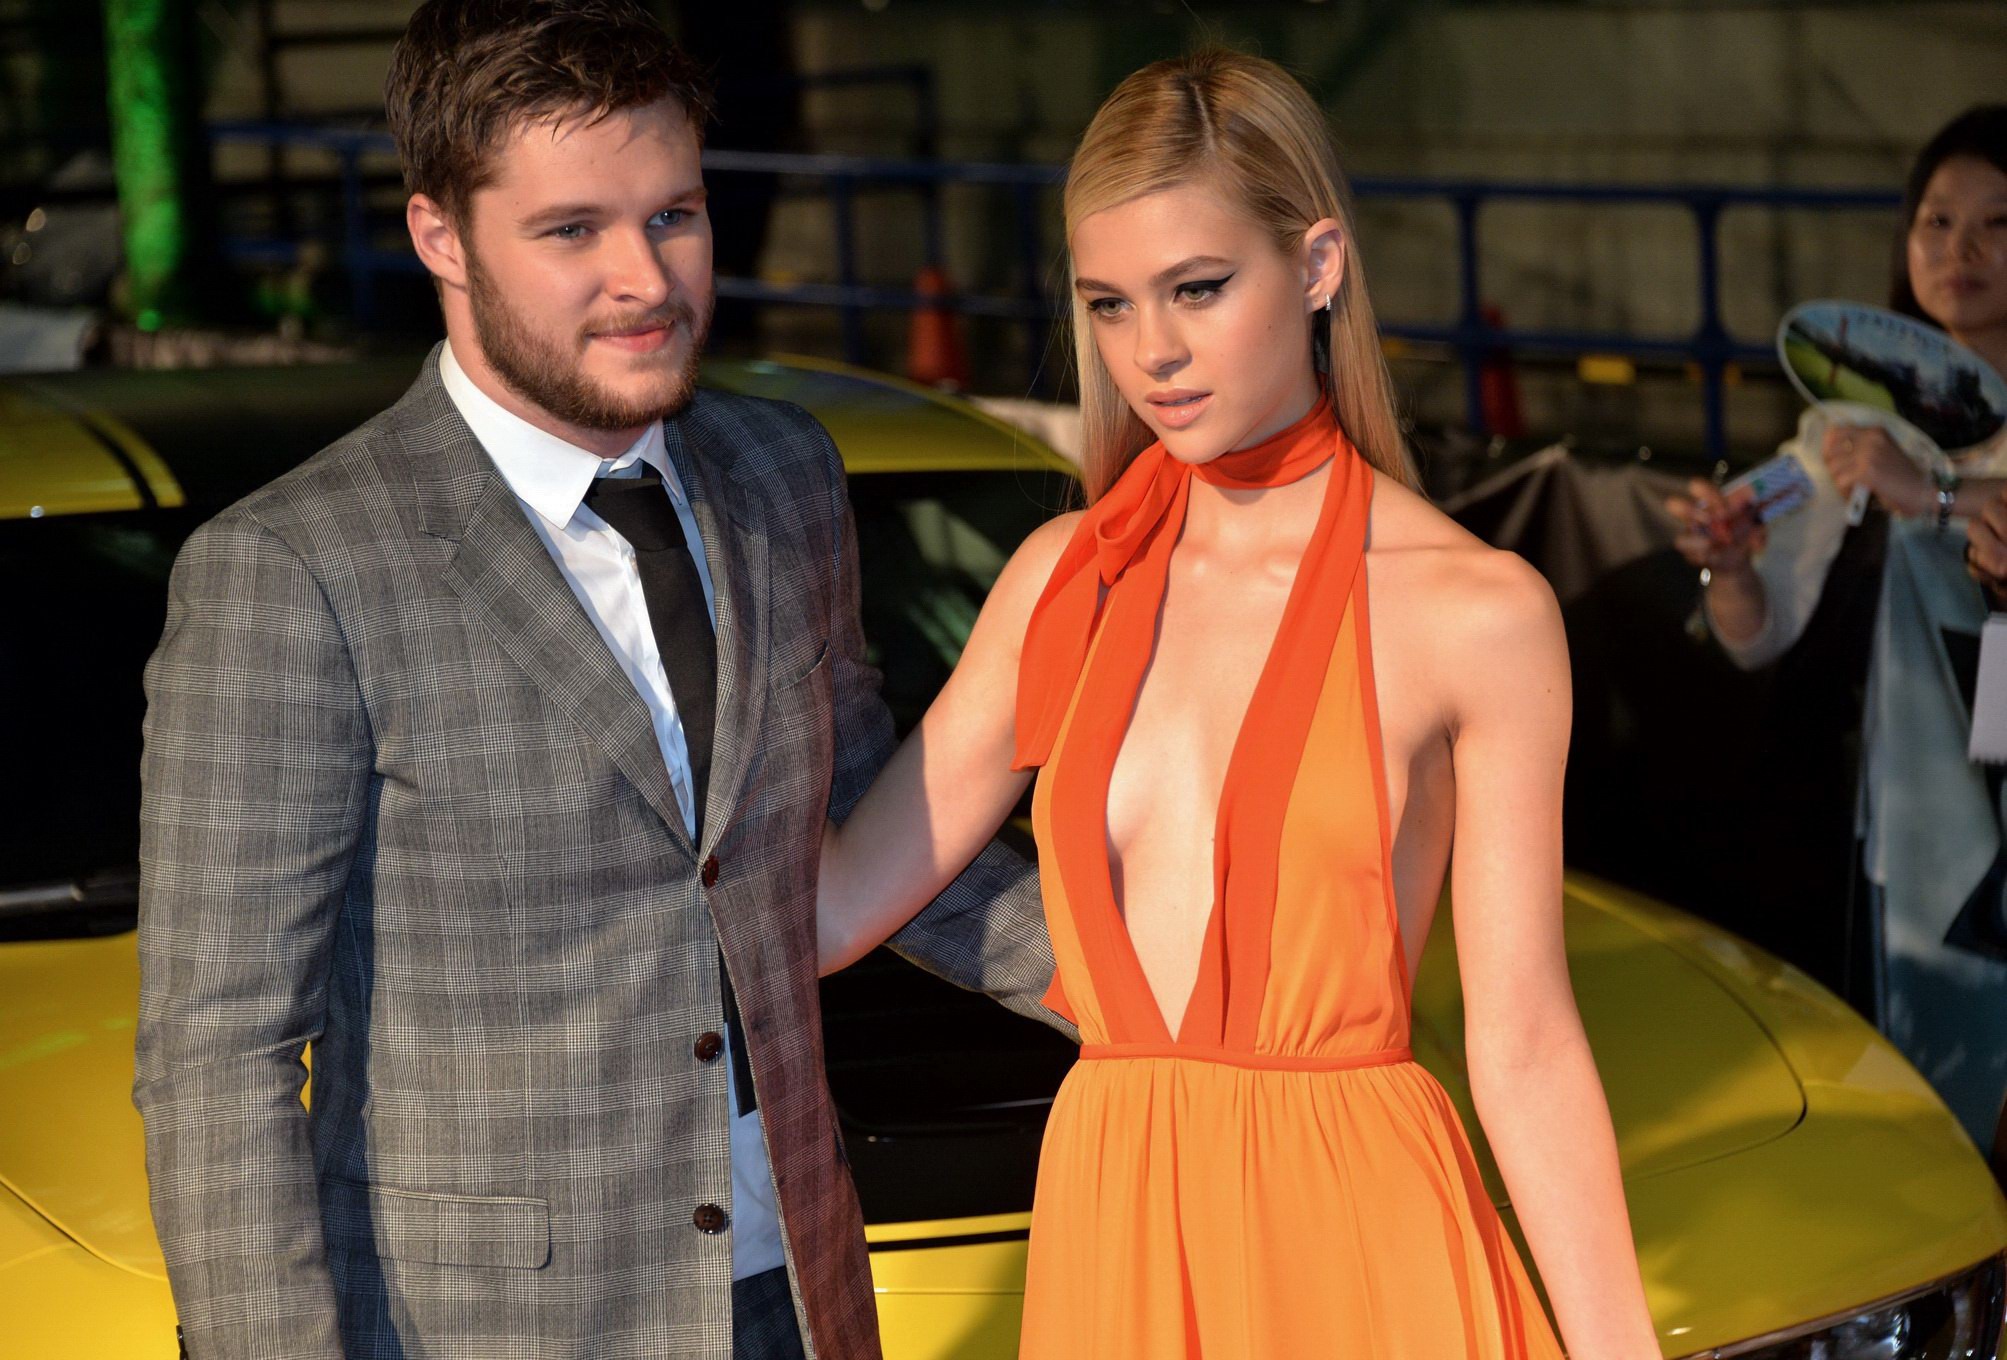 Nicola Peltz shows off her boobs braless in a low cut orange bareback dress at a #75189717